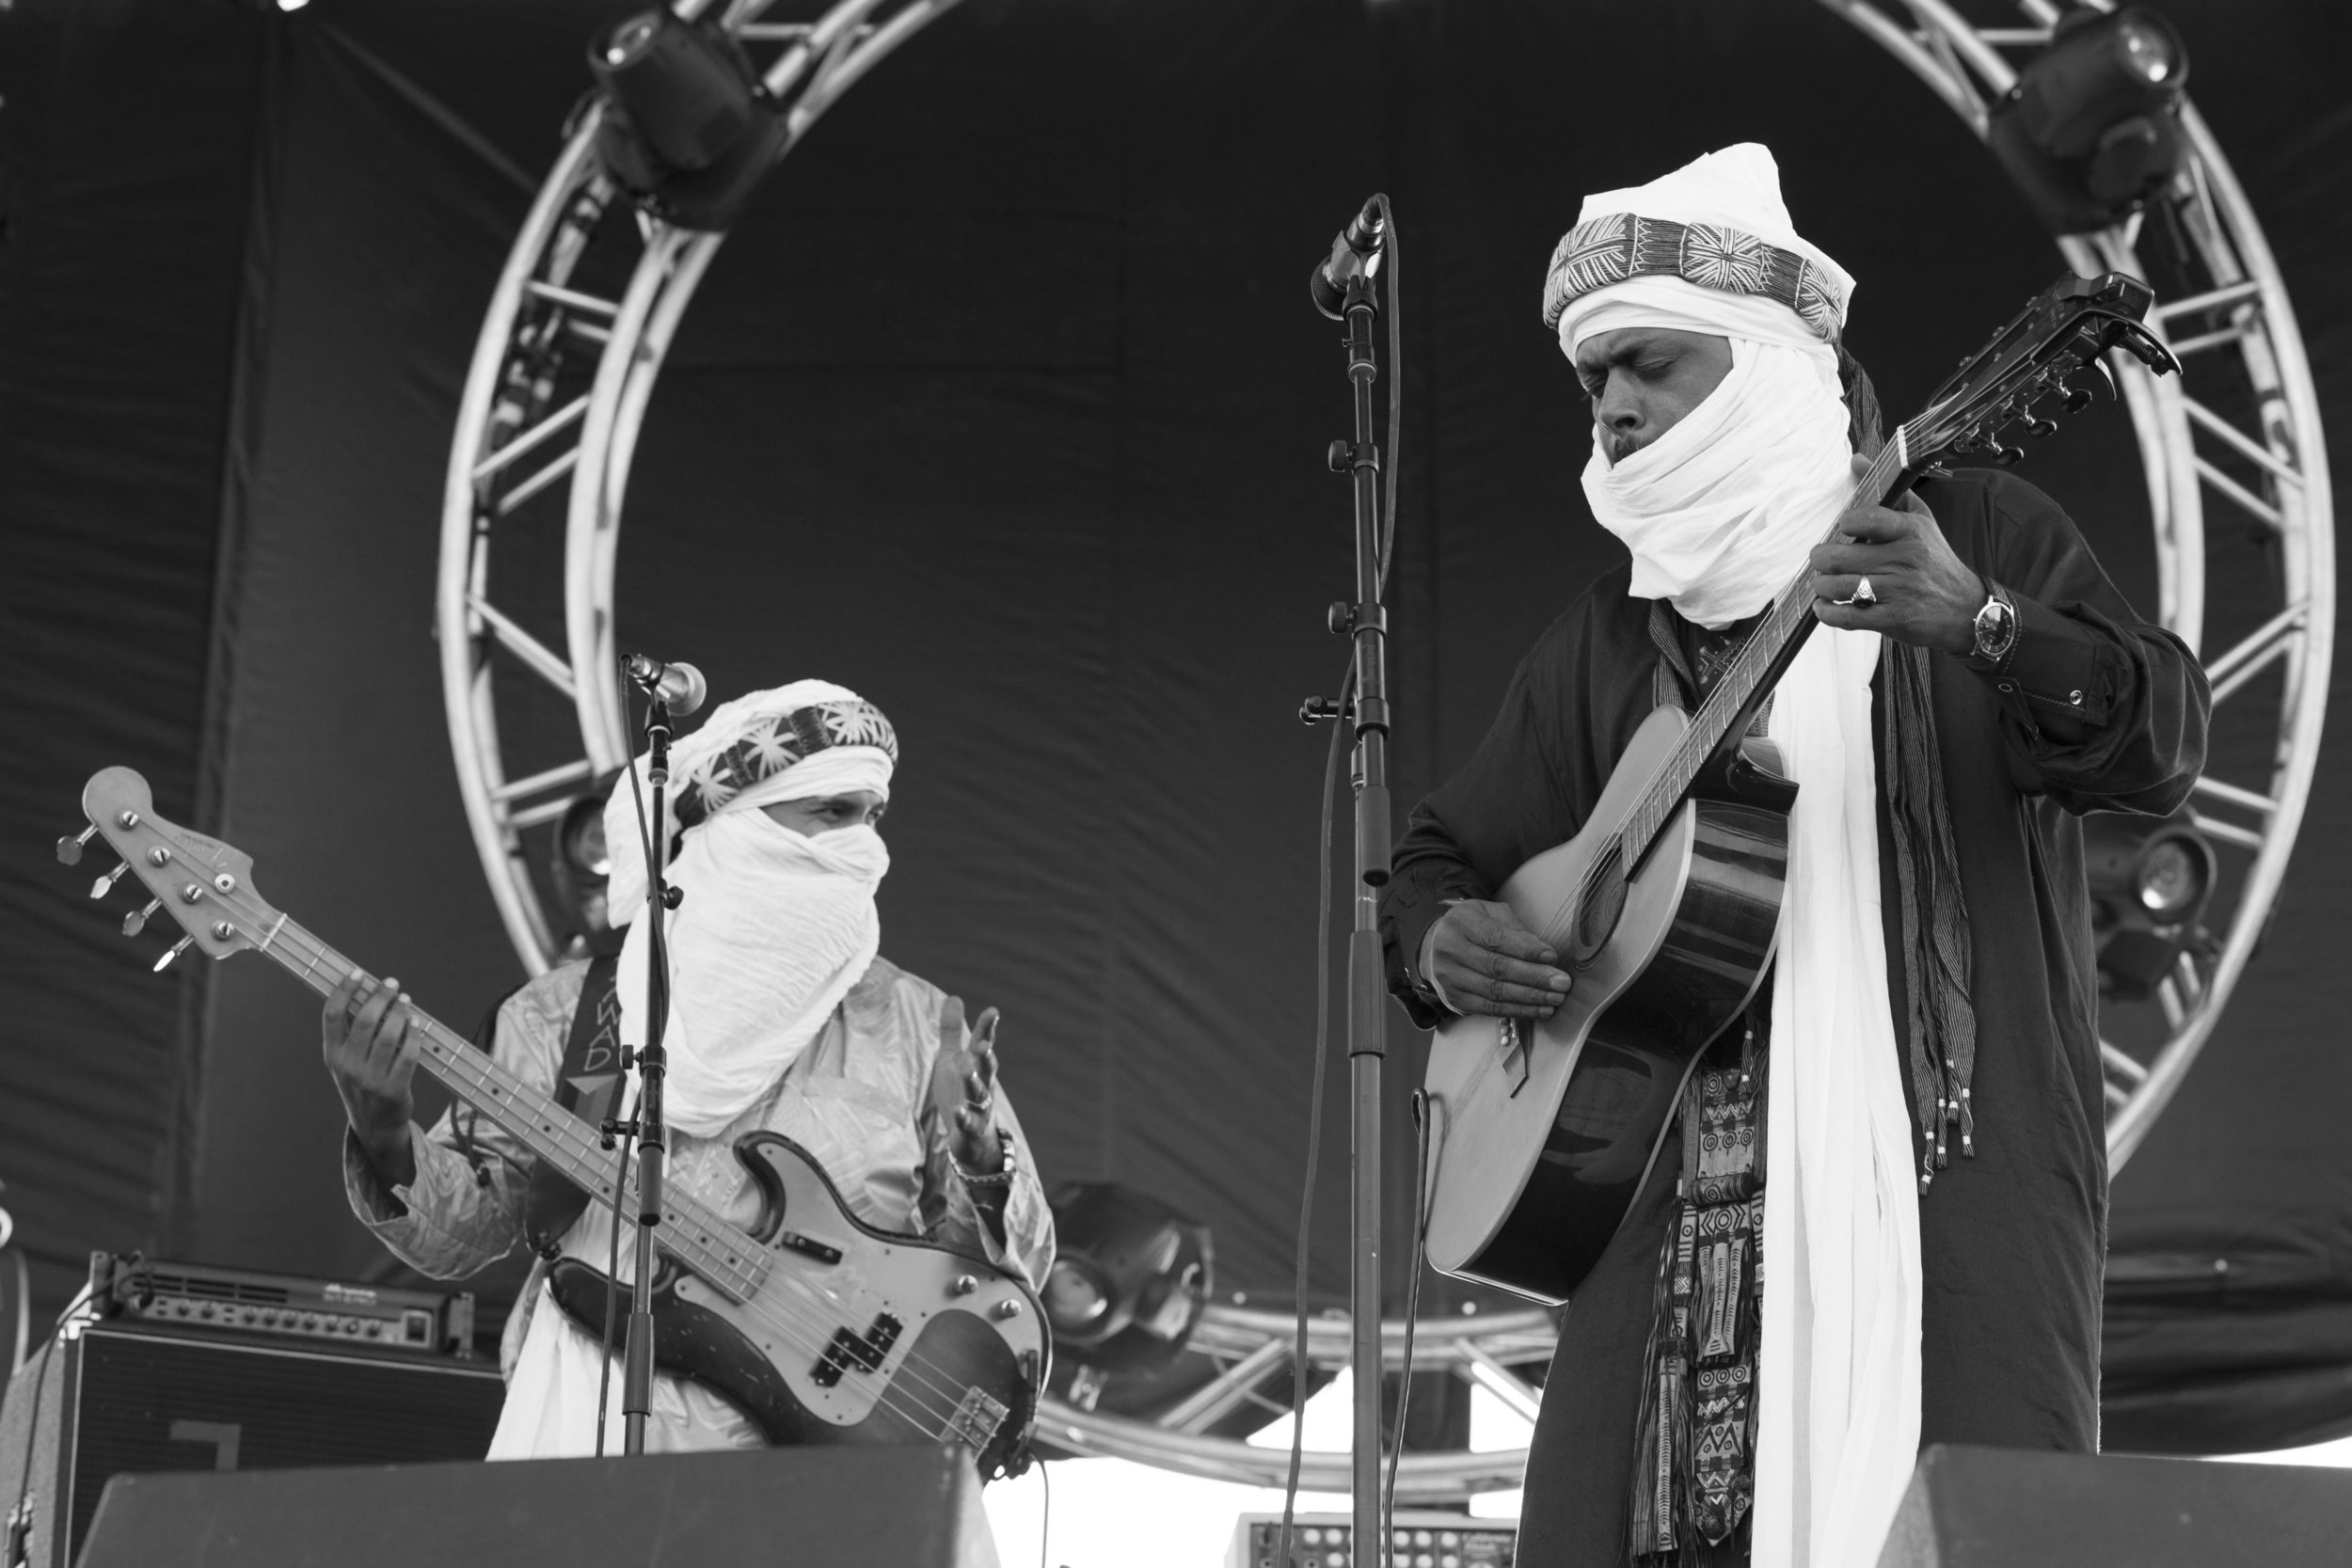  Alhassane Ag Touhami and Abdallah Ag Alhousseyni of North African band Tinariwen 